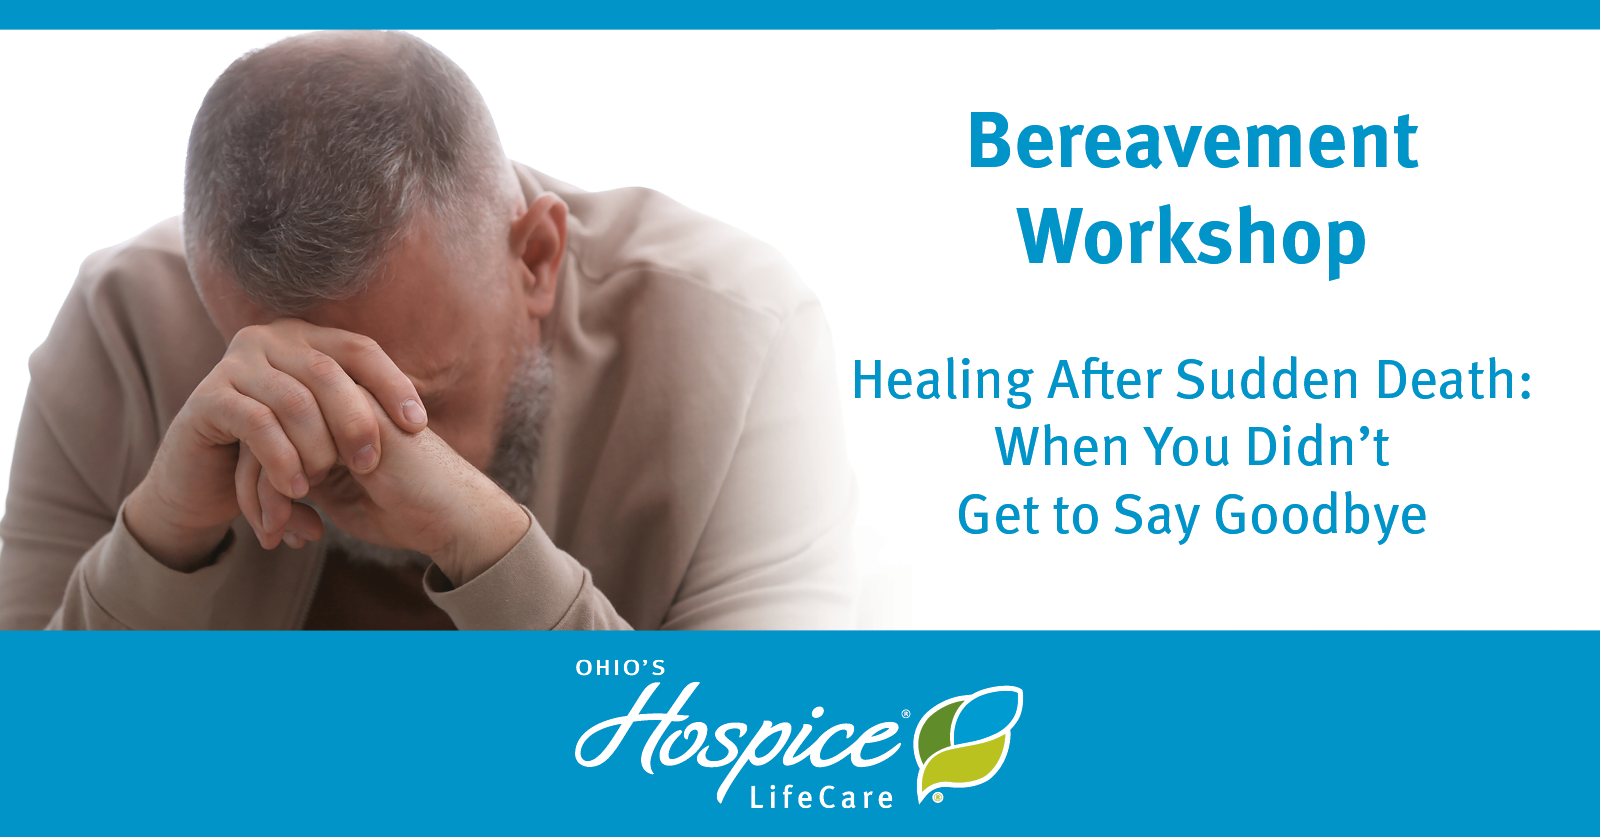 Bereavement Workshop - Healing after Sudden Death: When You Didn't Get to Say Goodbye